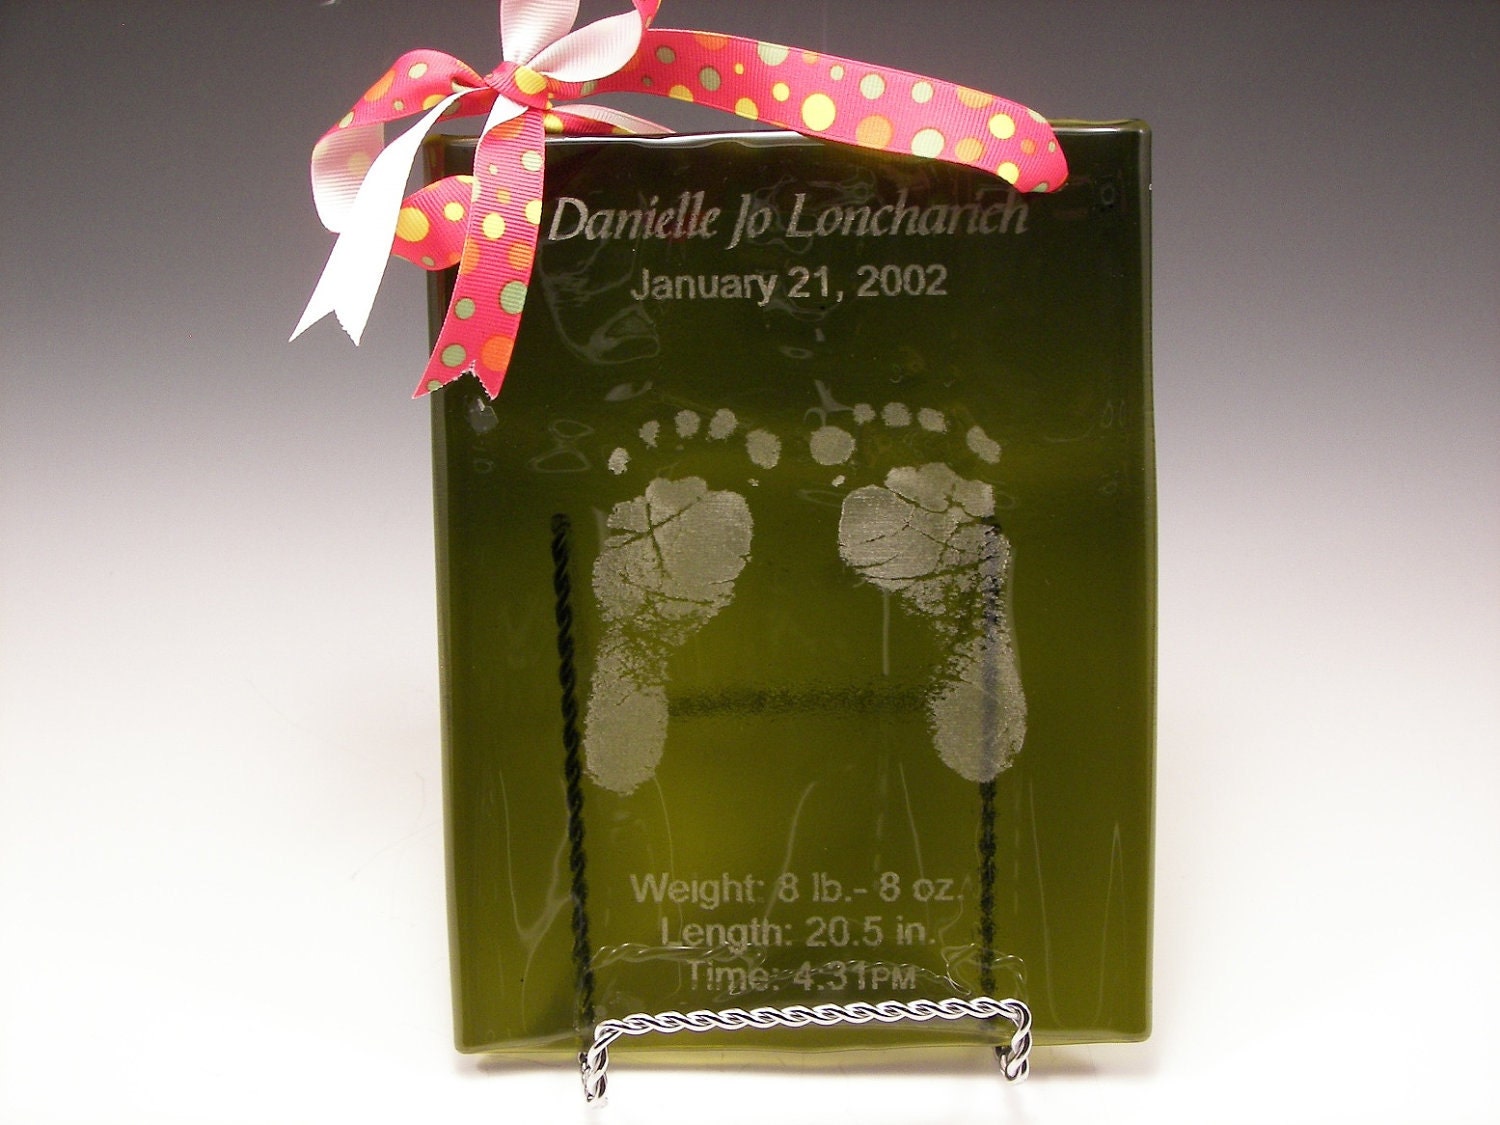 Birth Announcement Engraved On Flattened Wine Bottle